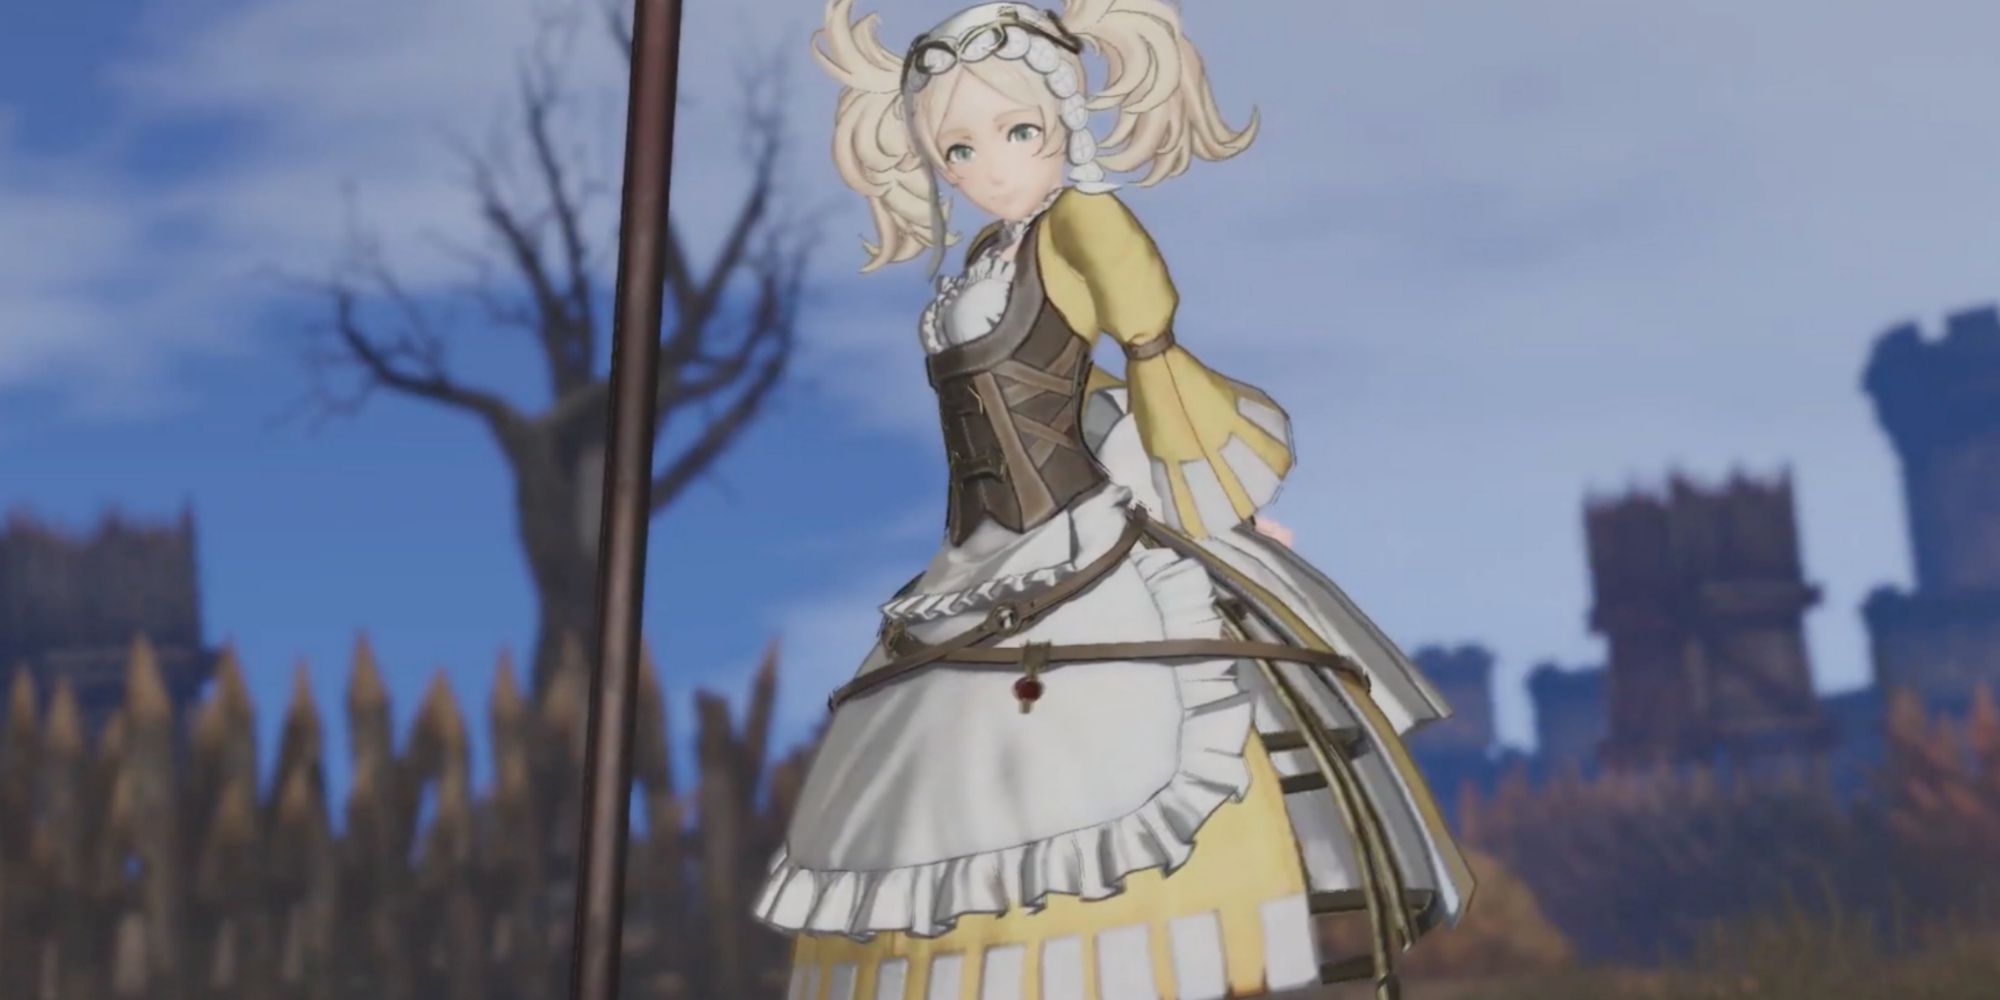 Lissa's Victor Pose from Fire Emblem Warriors 